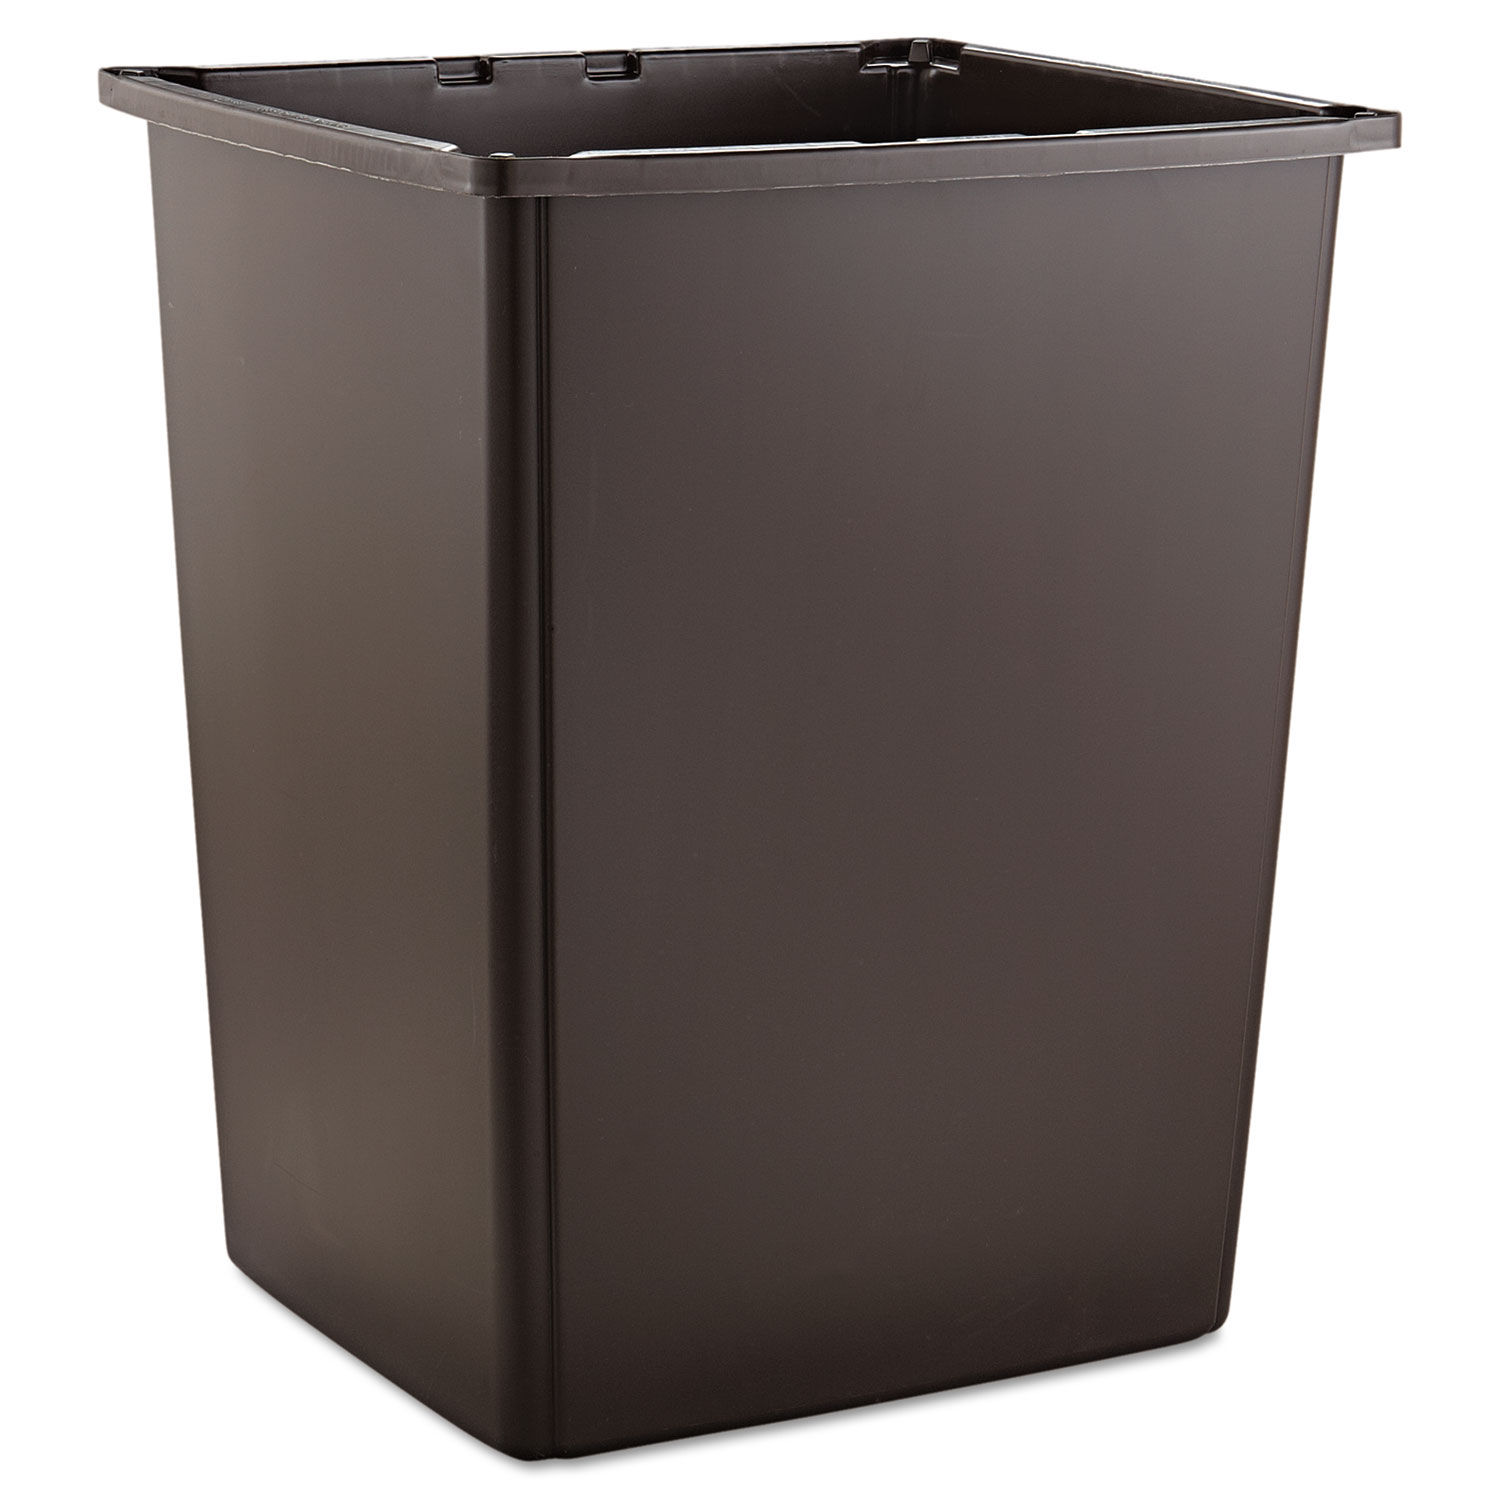 Glutton Container 56 gal, Plastic, Brown